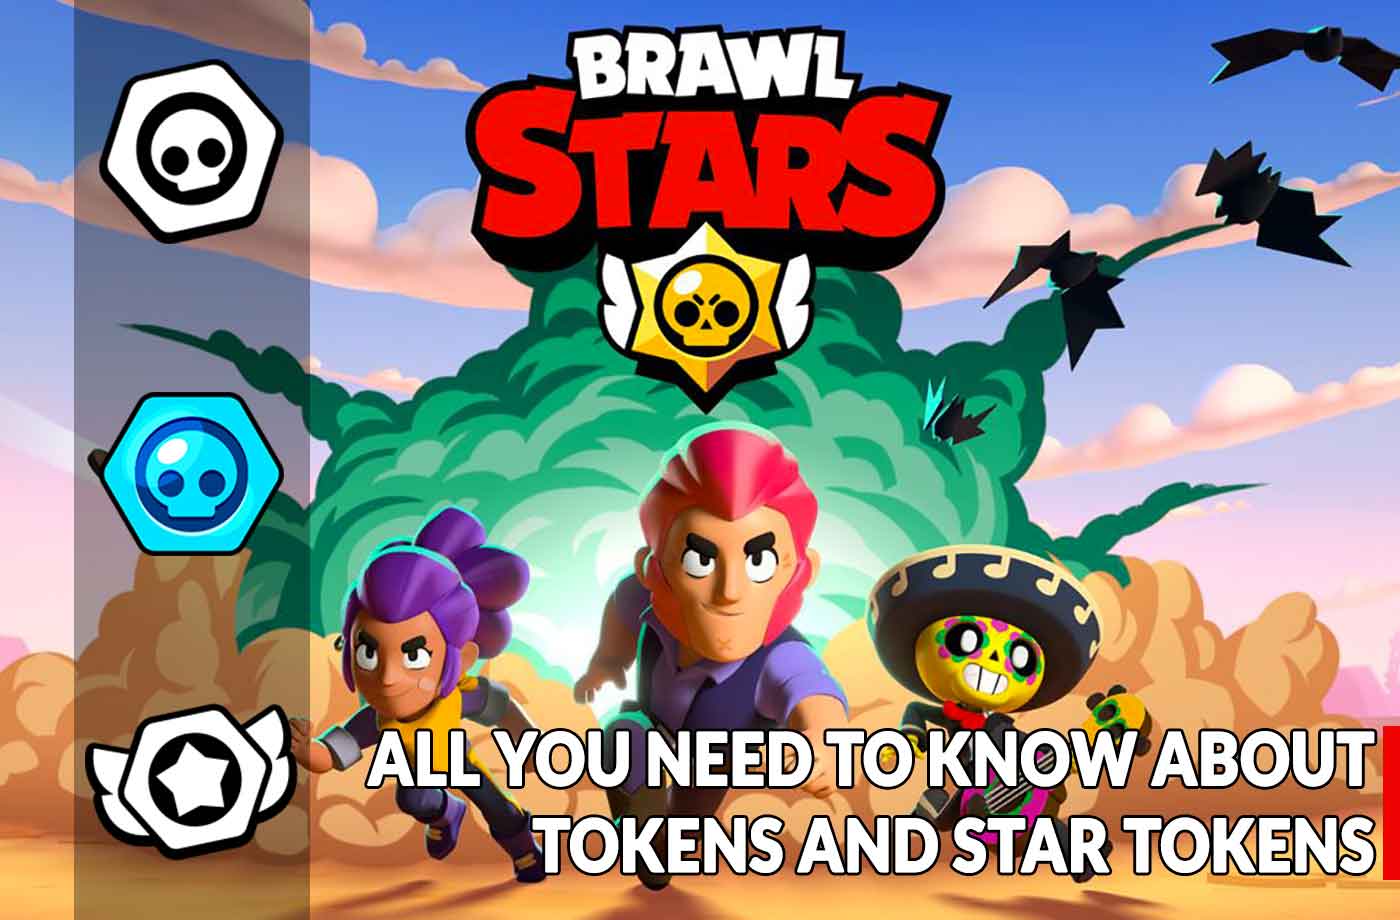 Guide Brawl Stars How To Quickly Gain Tokens And Star Tokens Kill The Game - comment jouer les tickets d'evenements brawl stars